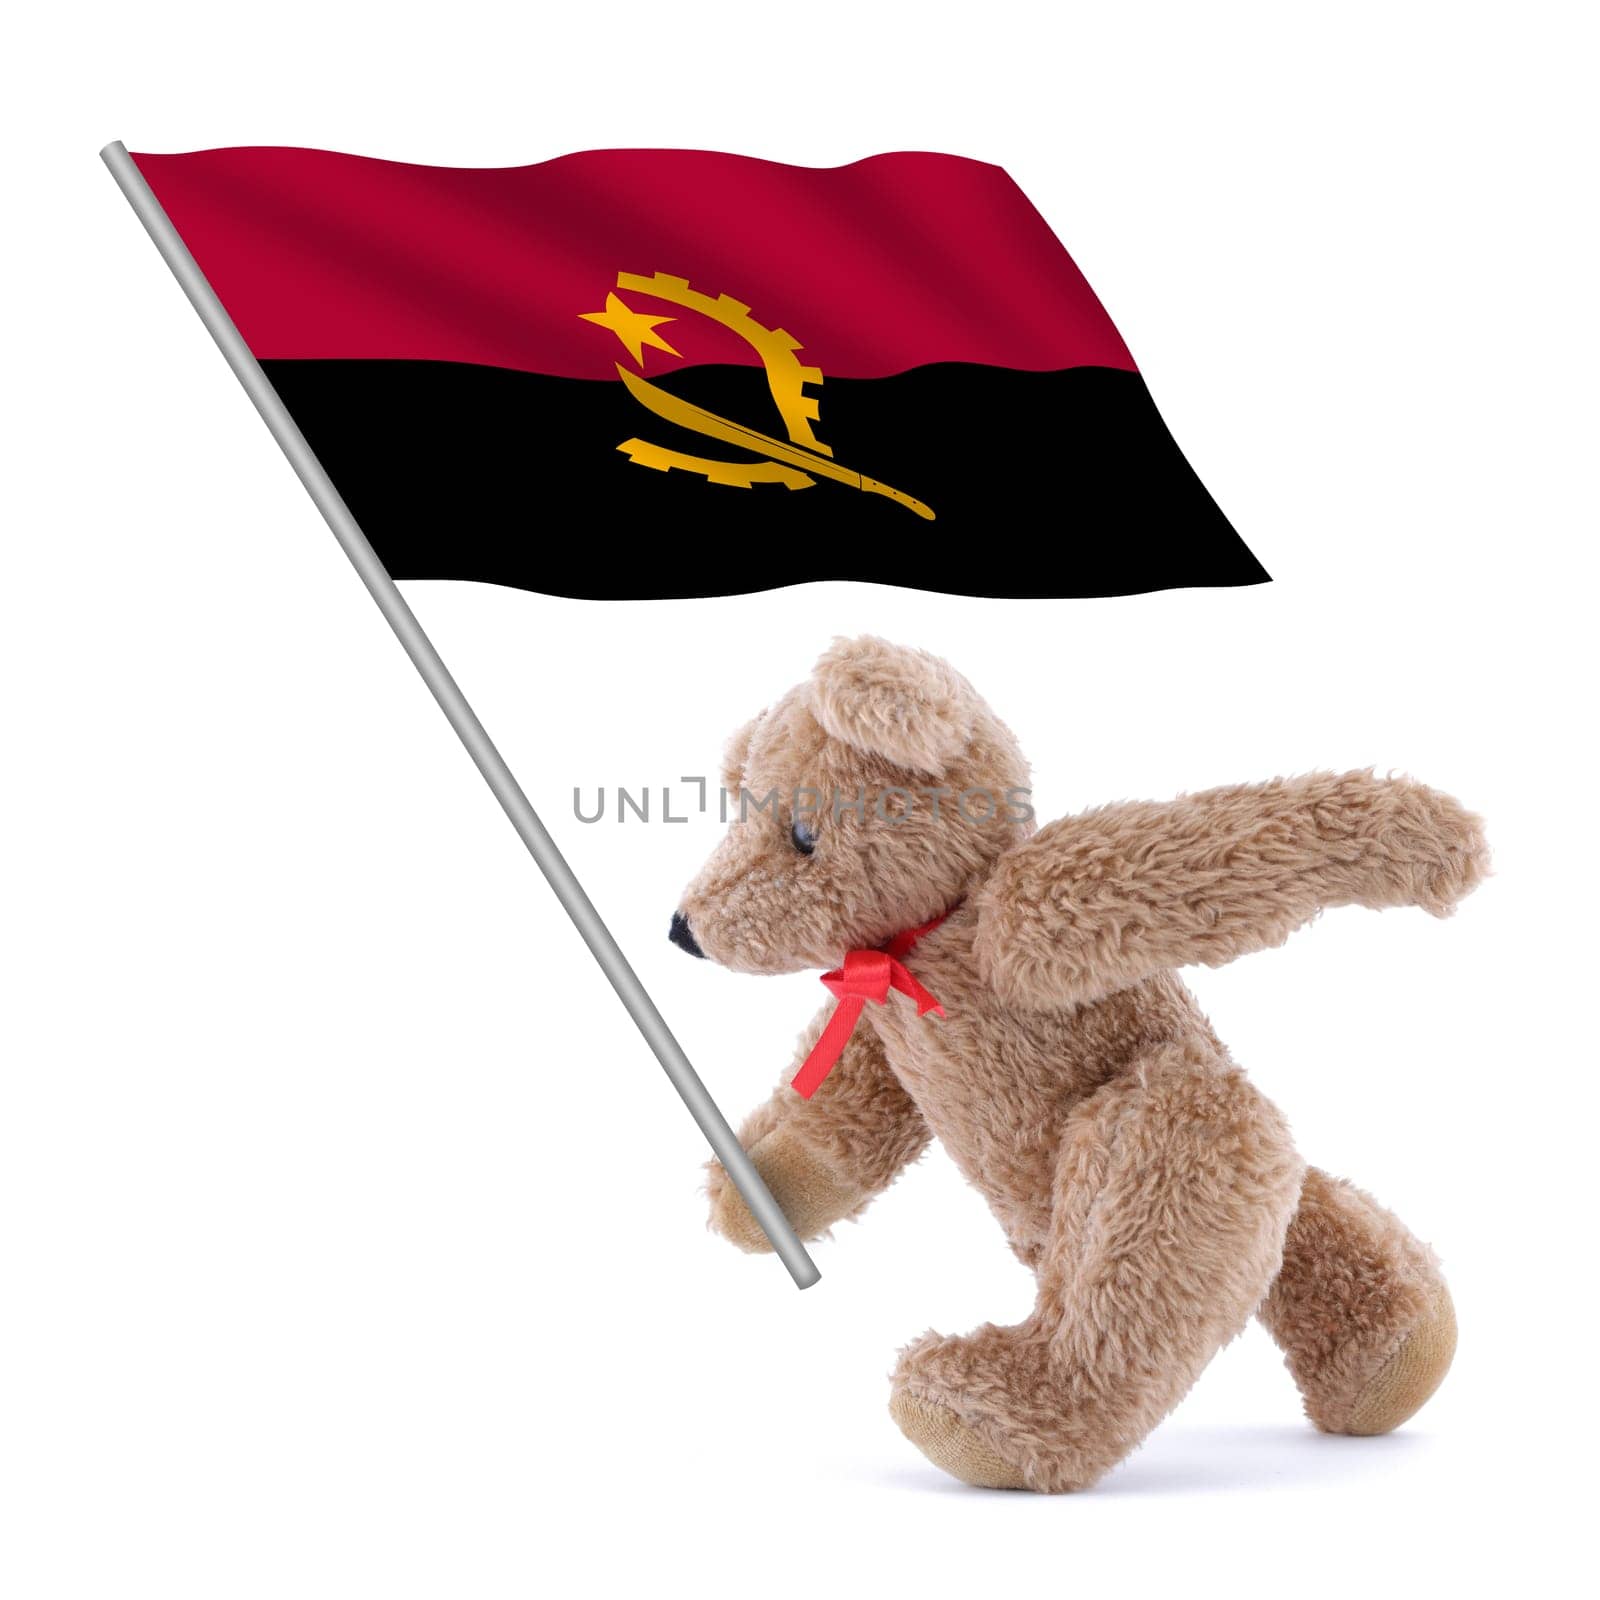 Angola flag carried by a cute teddy bear by VivacityImages